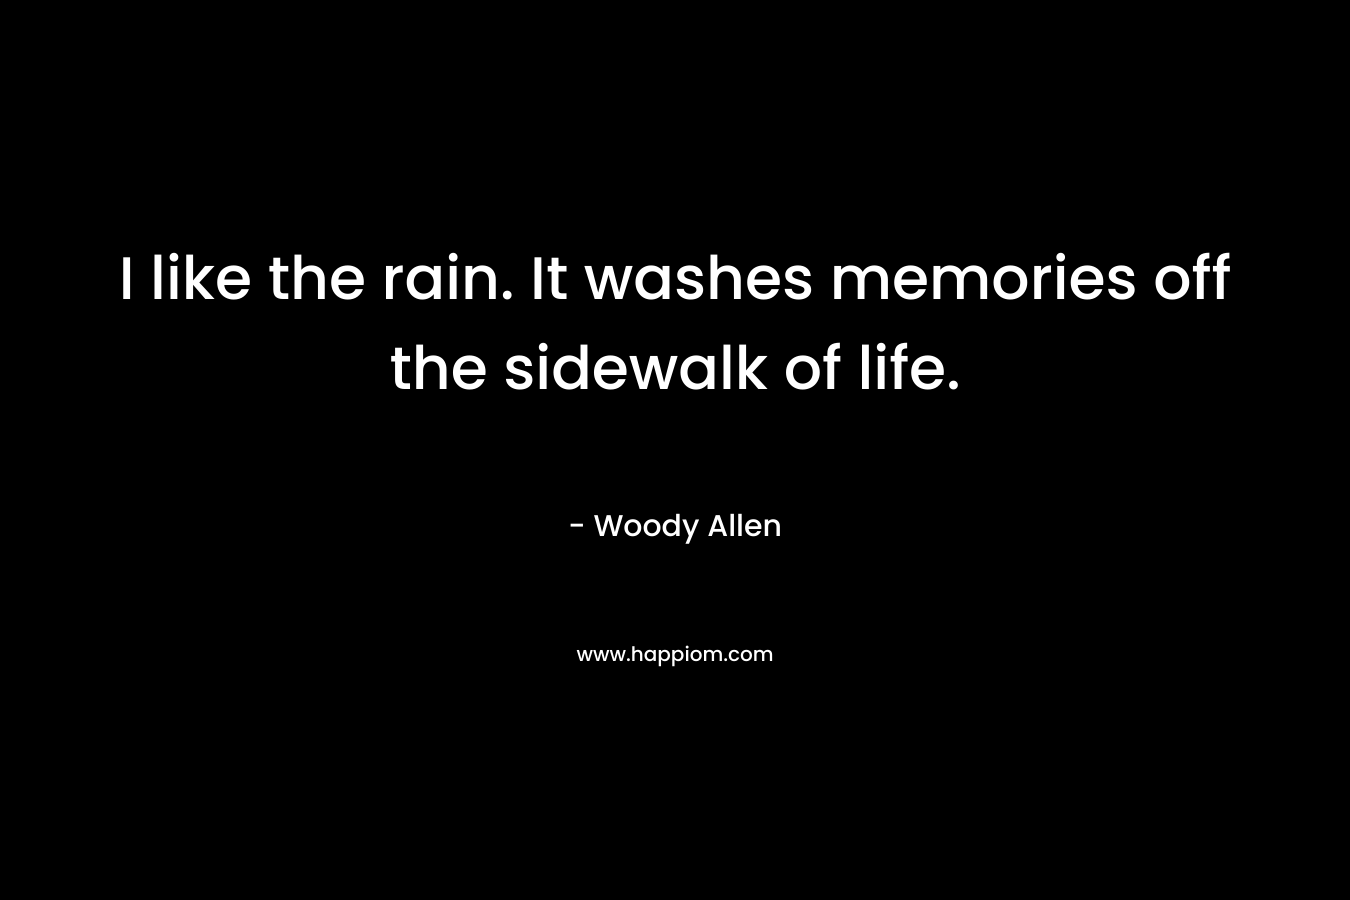 I like the rain. It washes memories off the sidewalk of life.